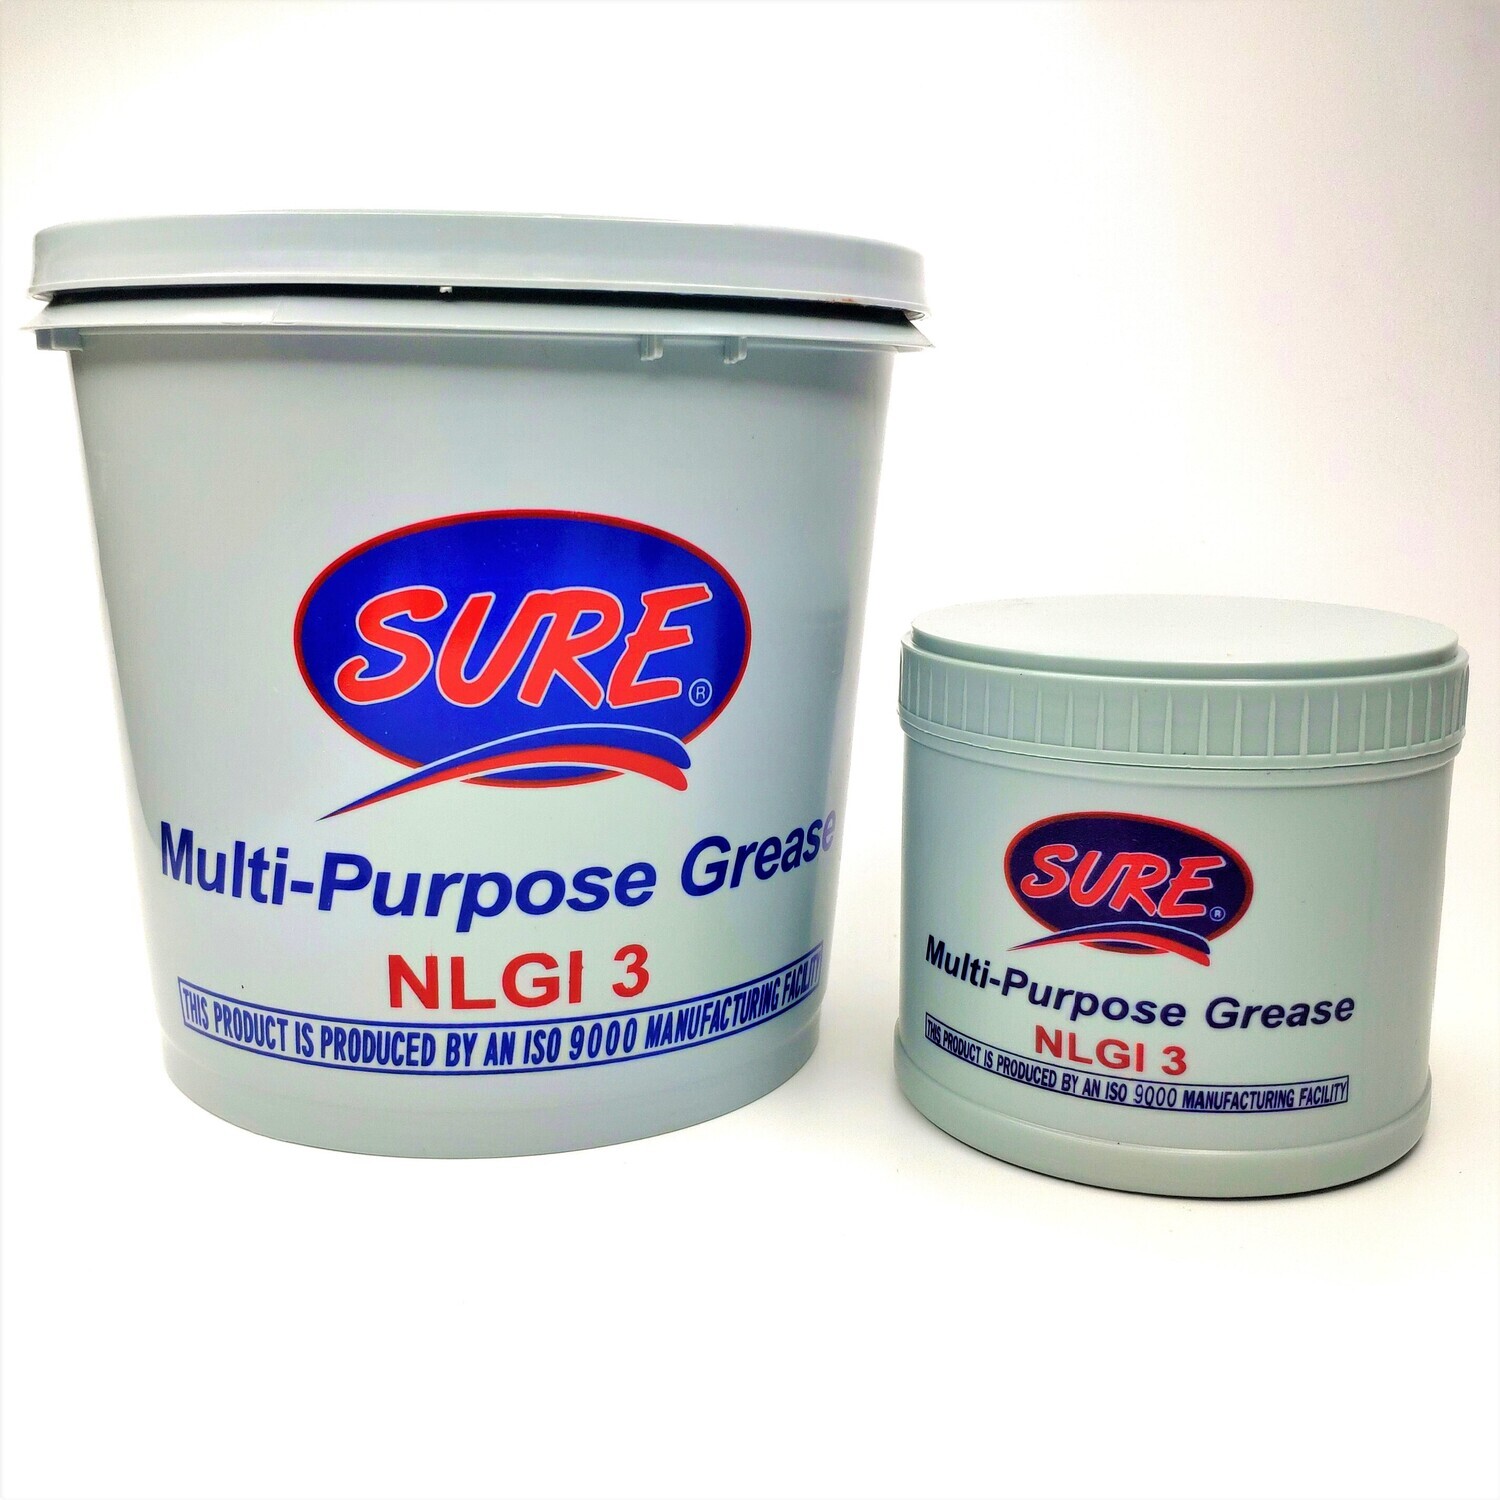 Sure Grease Fits Cars Trucks Motorcycles Bikes Industrial Applications NLGI 3